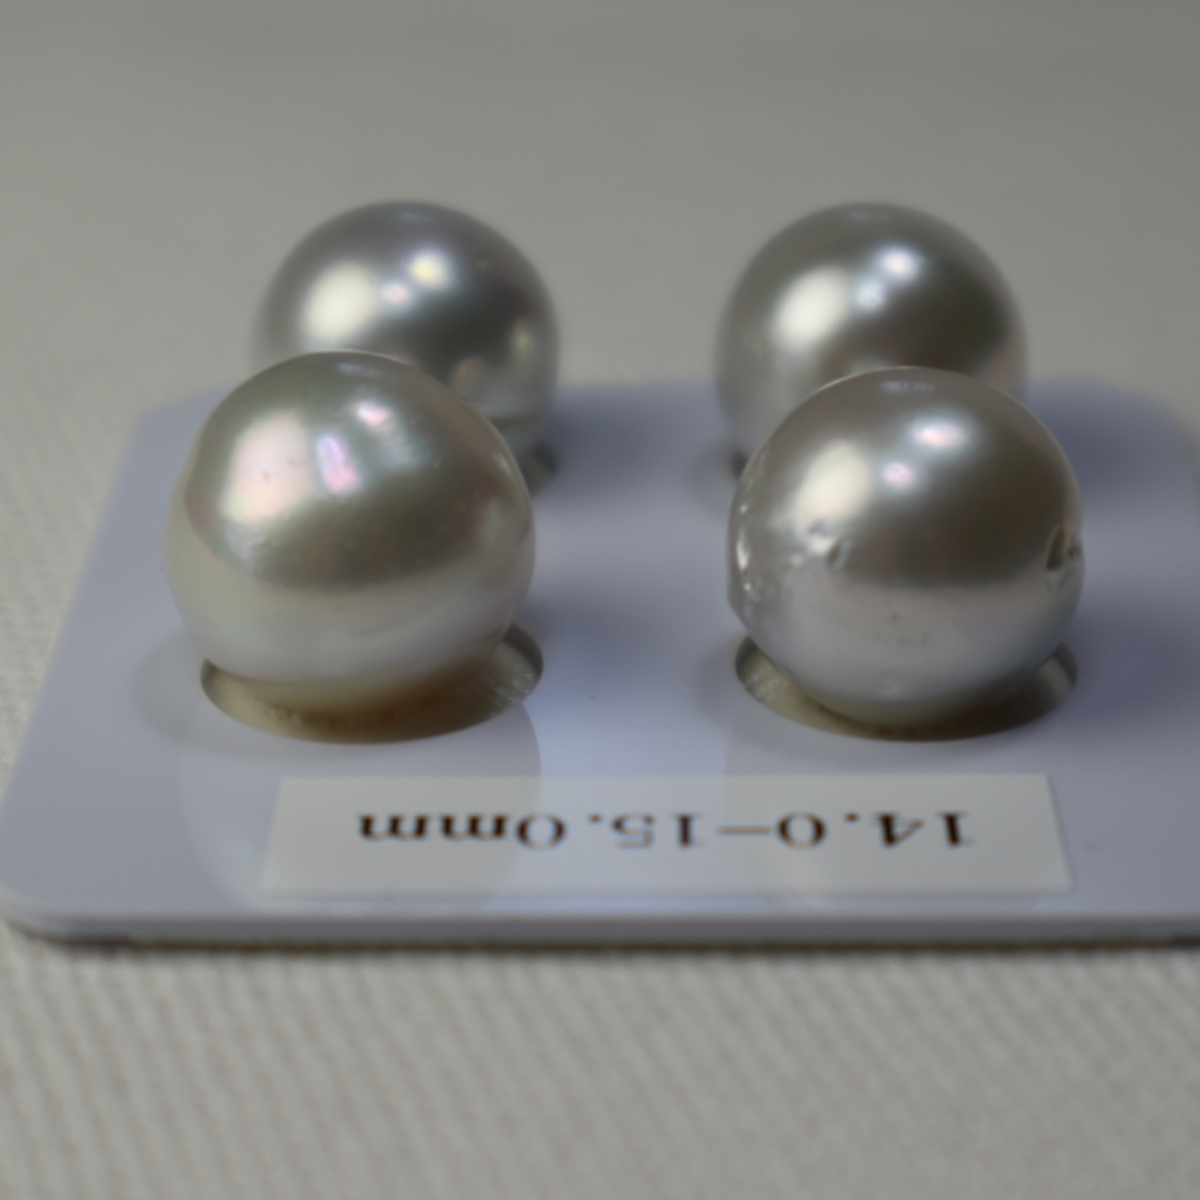 [1 jpy selling out ] White Butterfly pearl loose 14.0-15.0mm. summarize 4 piece 604138